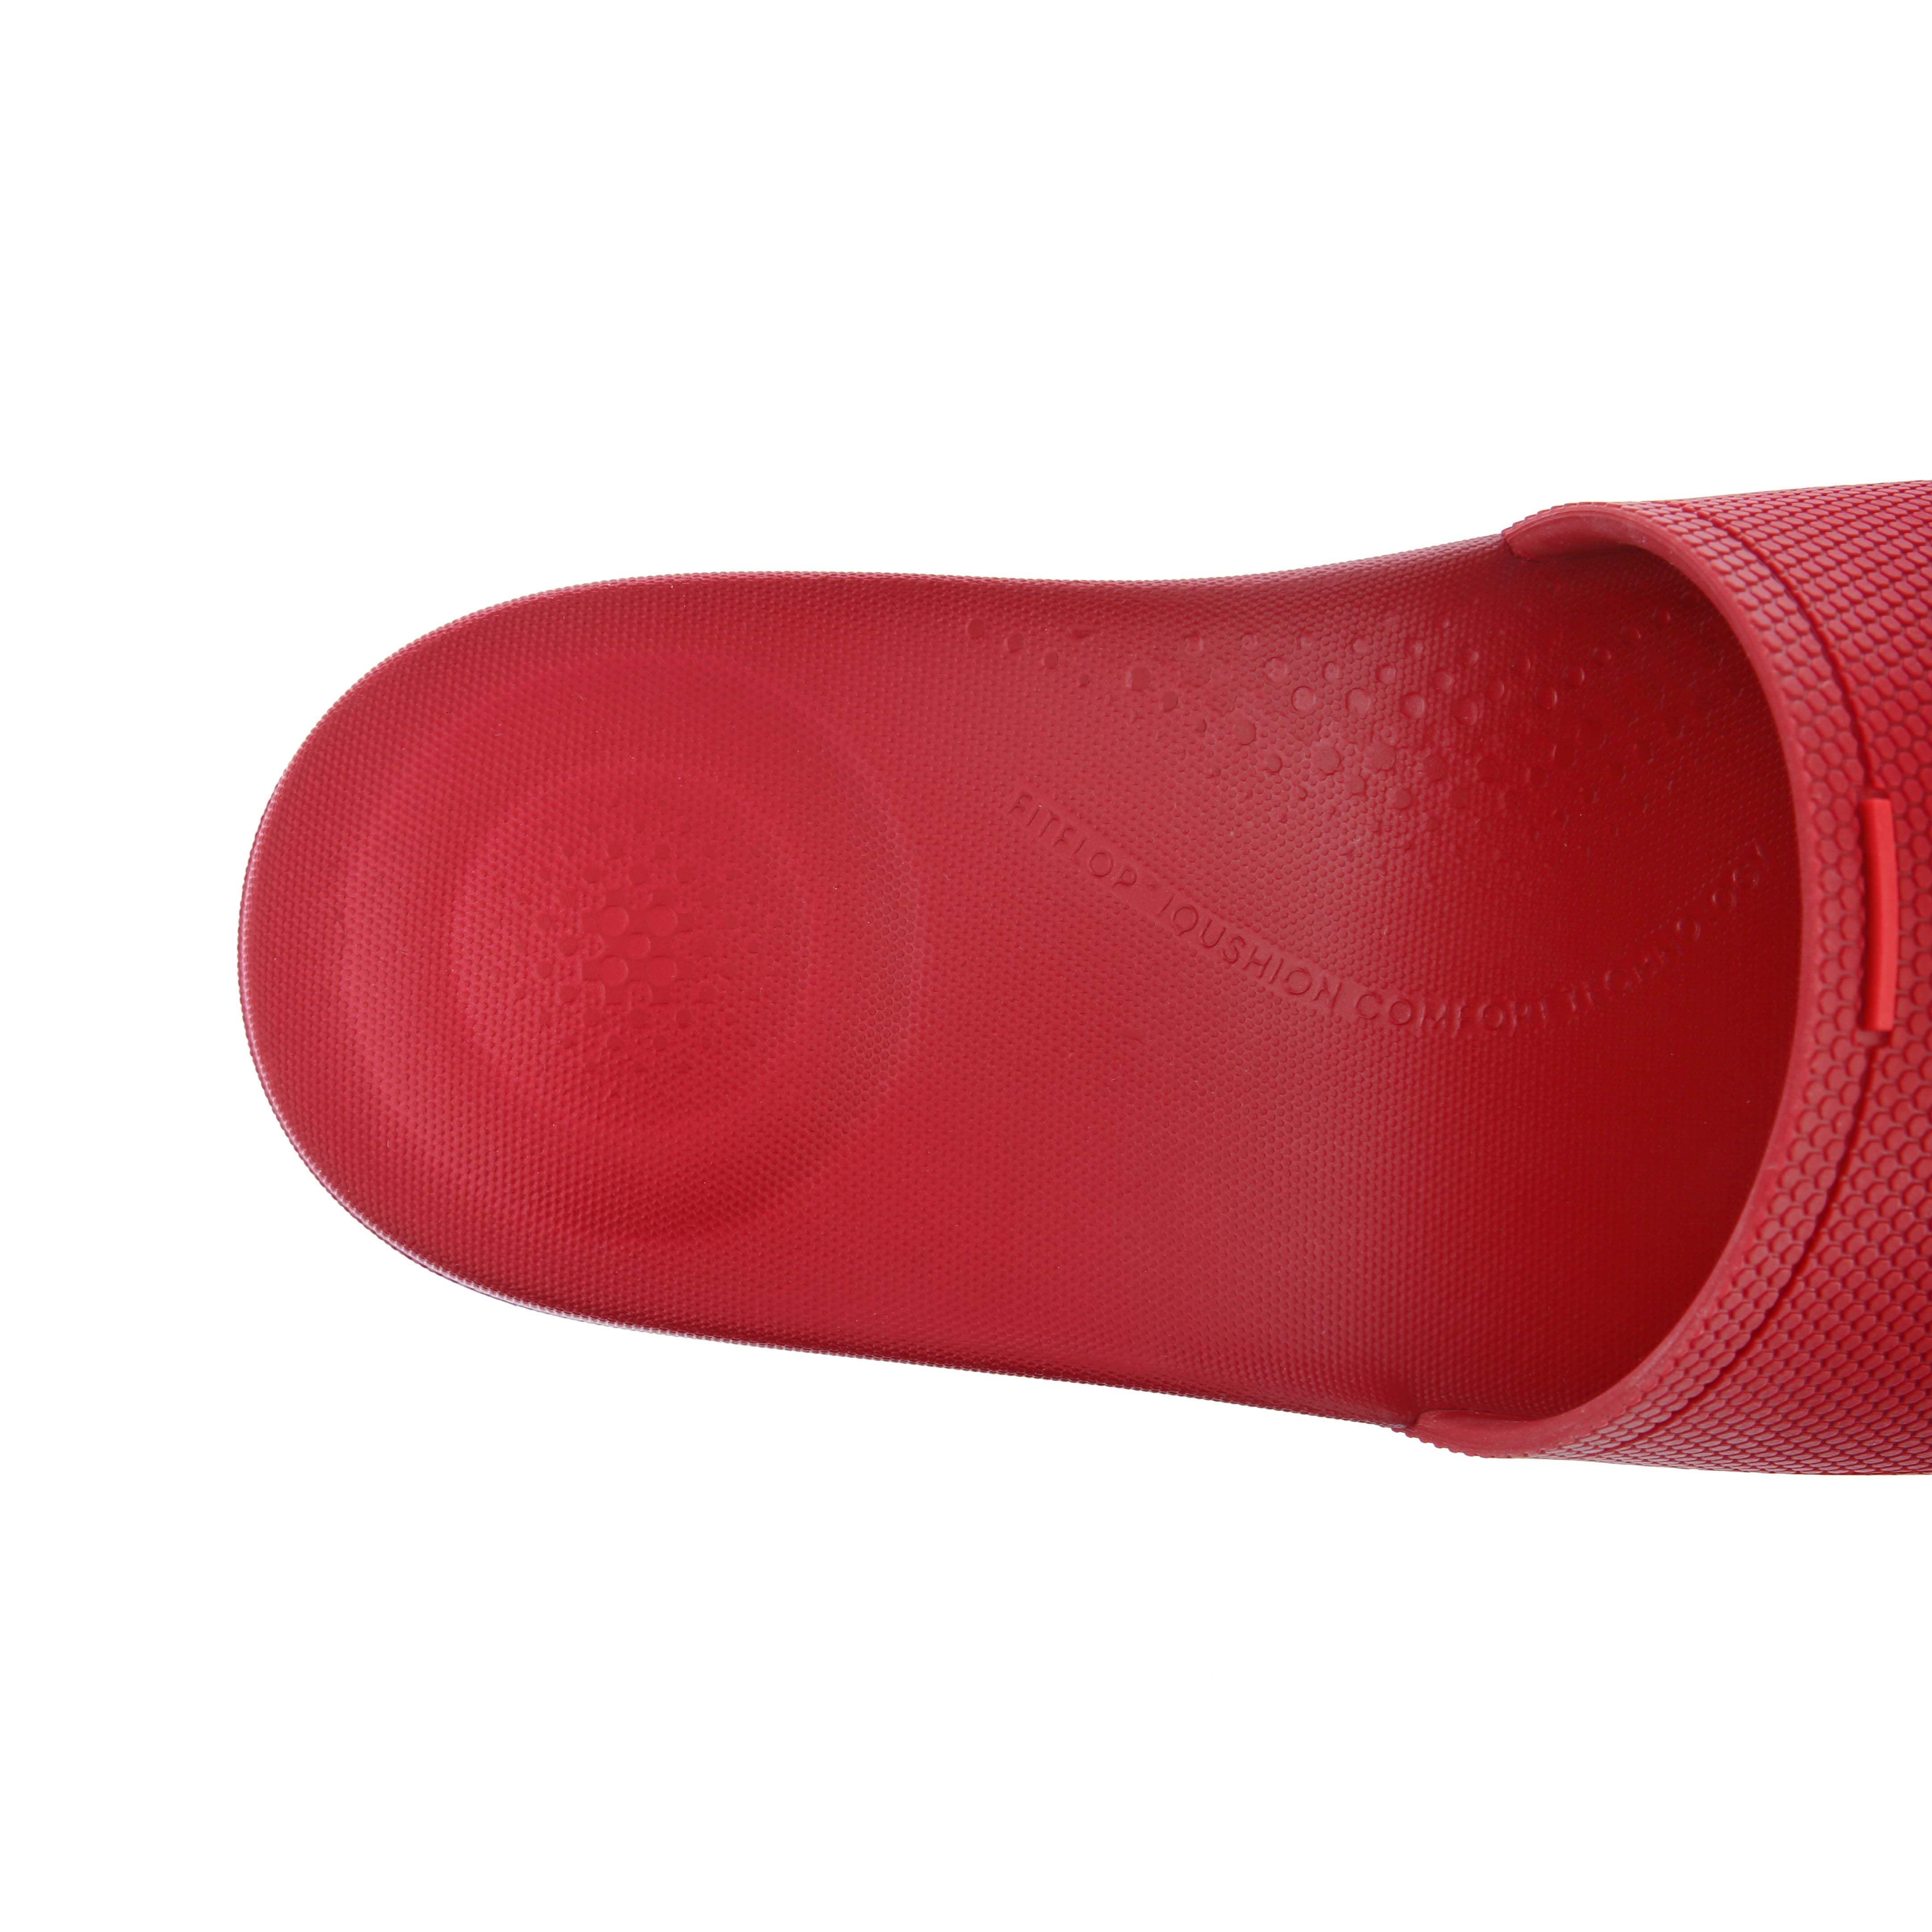 Fitflop's pool sliders that have been described as 'like yoga for feet' are  FINALLY back in stock